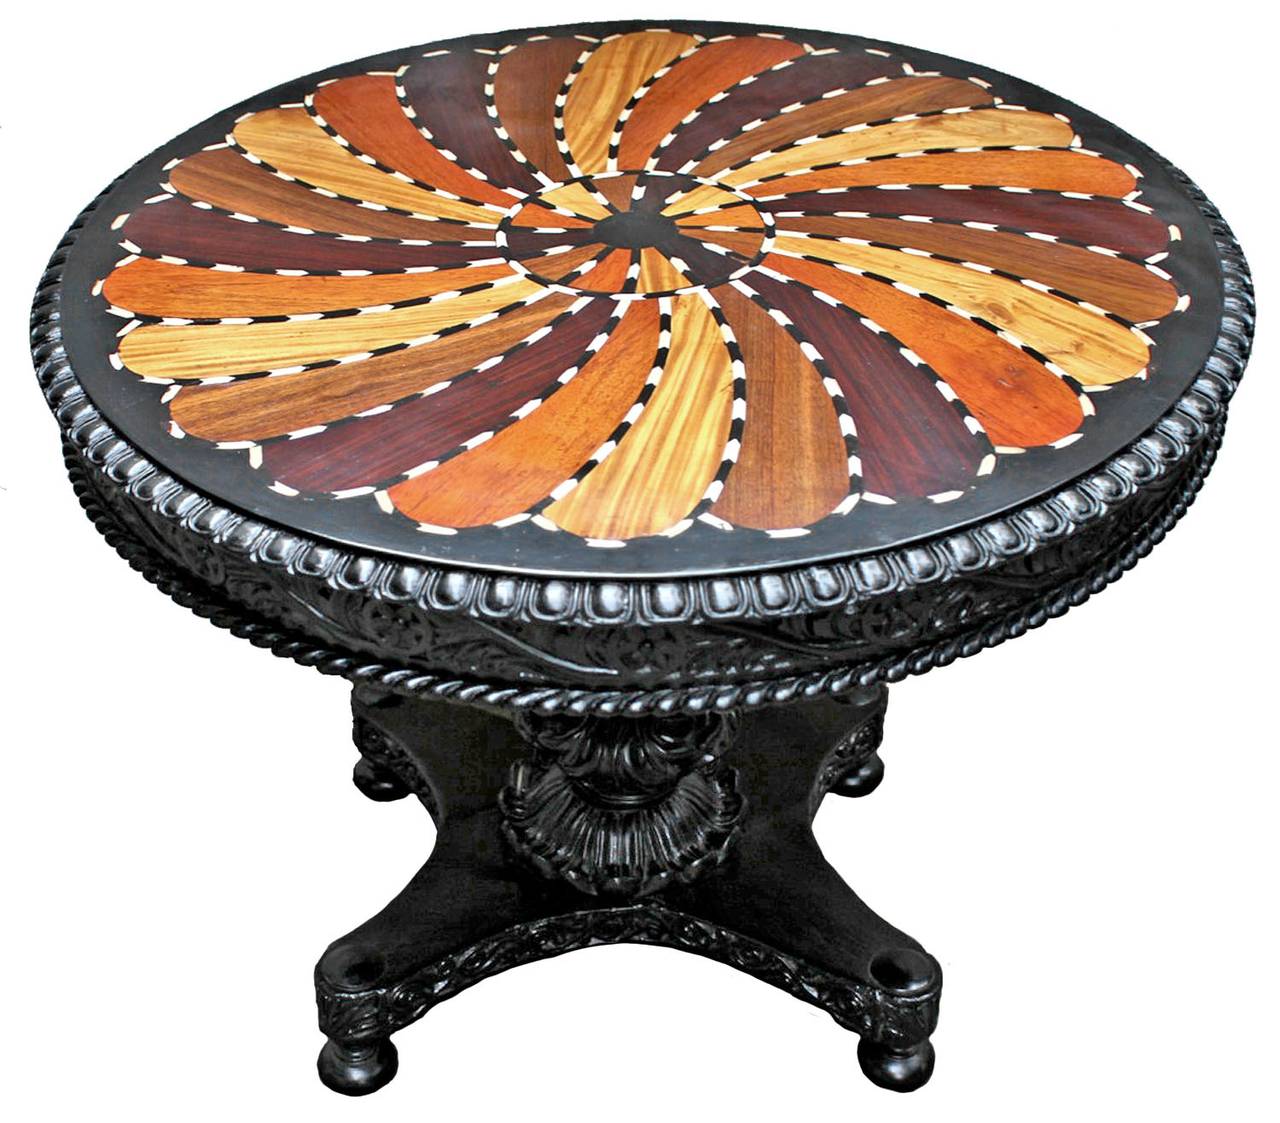 circular tilt-top inlaid with a whorl of specimen veneers including Ivory and Ebony. This style was a specialty of the Galle District of Ceylon which was famous for it's specimen-wood furniture. For further information about furniture from this